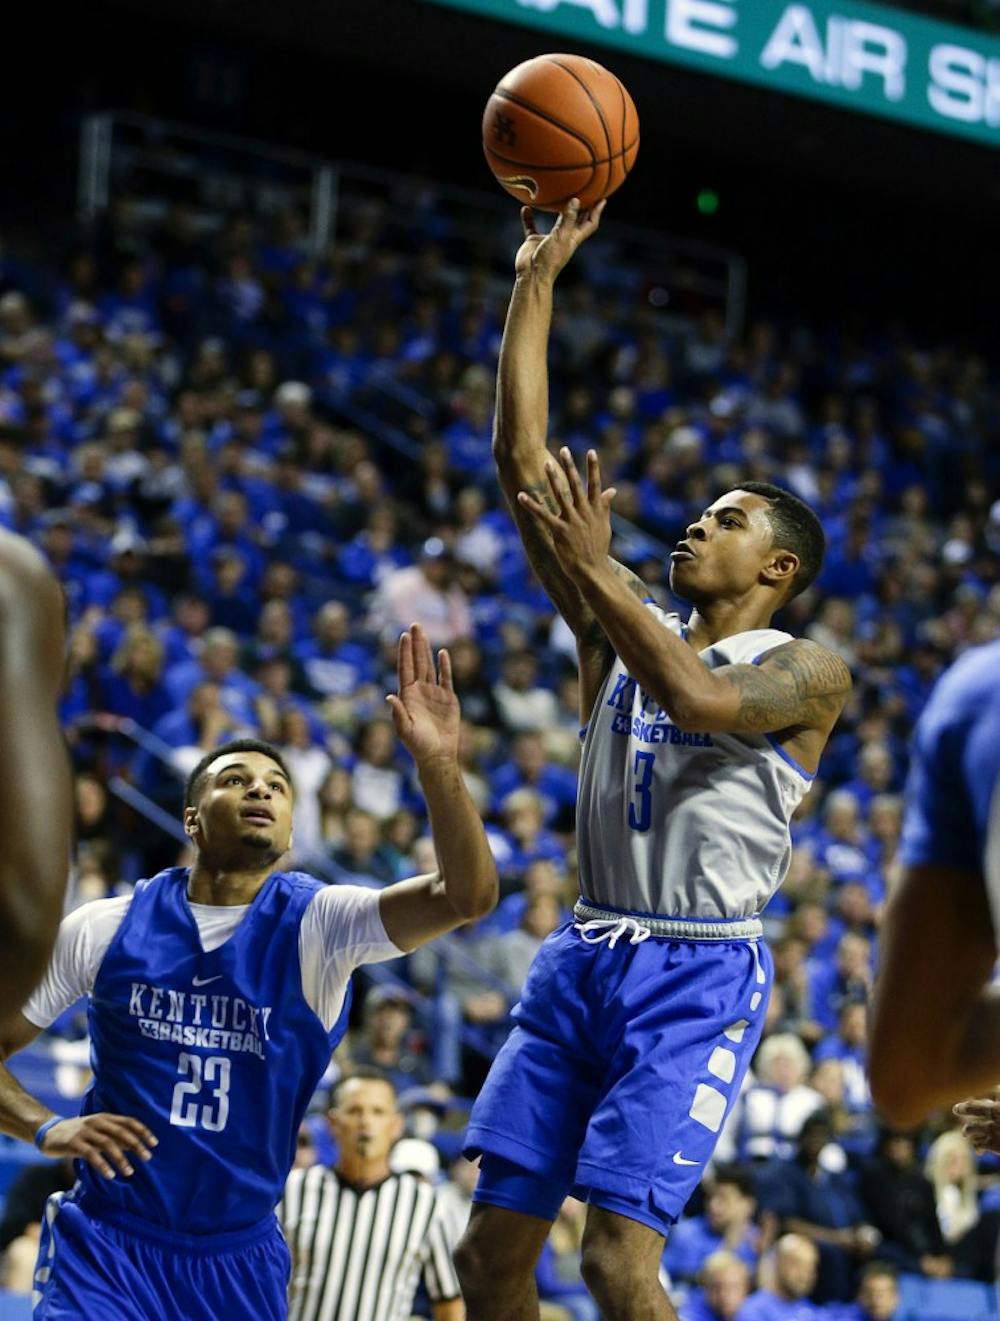 Kentucky&apos;s Tyler Ulis (3) puts in a short jumper during the team&apos;s Blue-White game on Tuesday, Oct. 27, 2015, at Rupp Arena in Lexington, Ky. (Mark Cornelison/Lexington Herald-Leader/TNS)